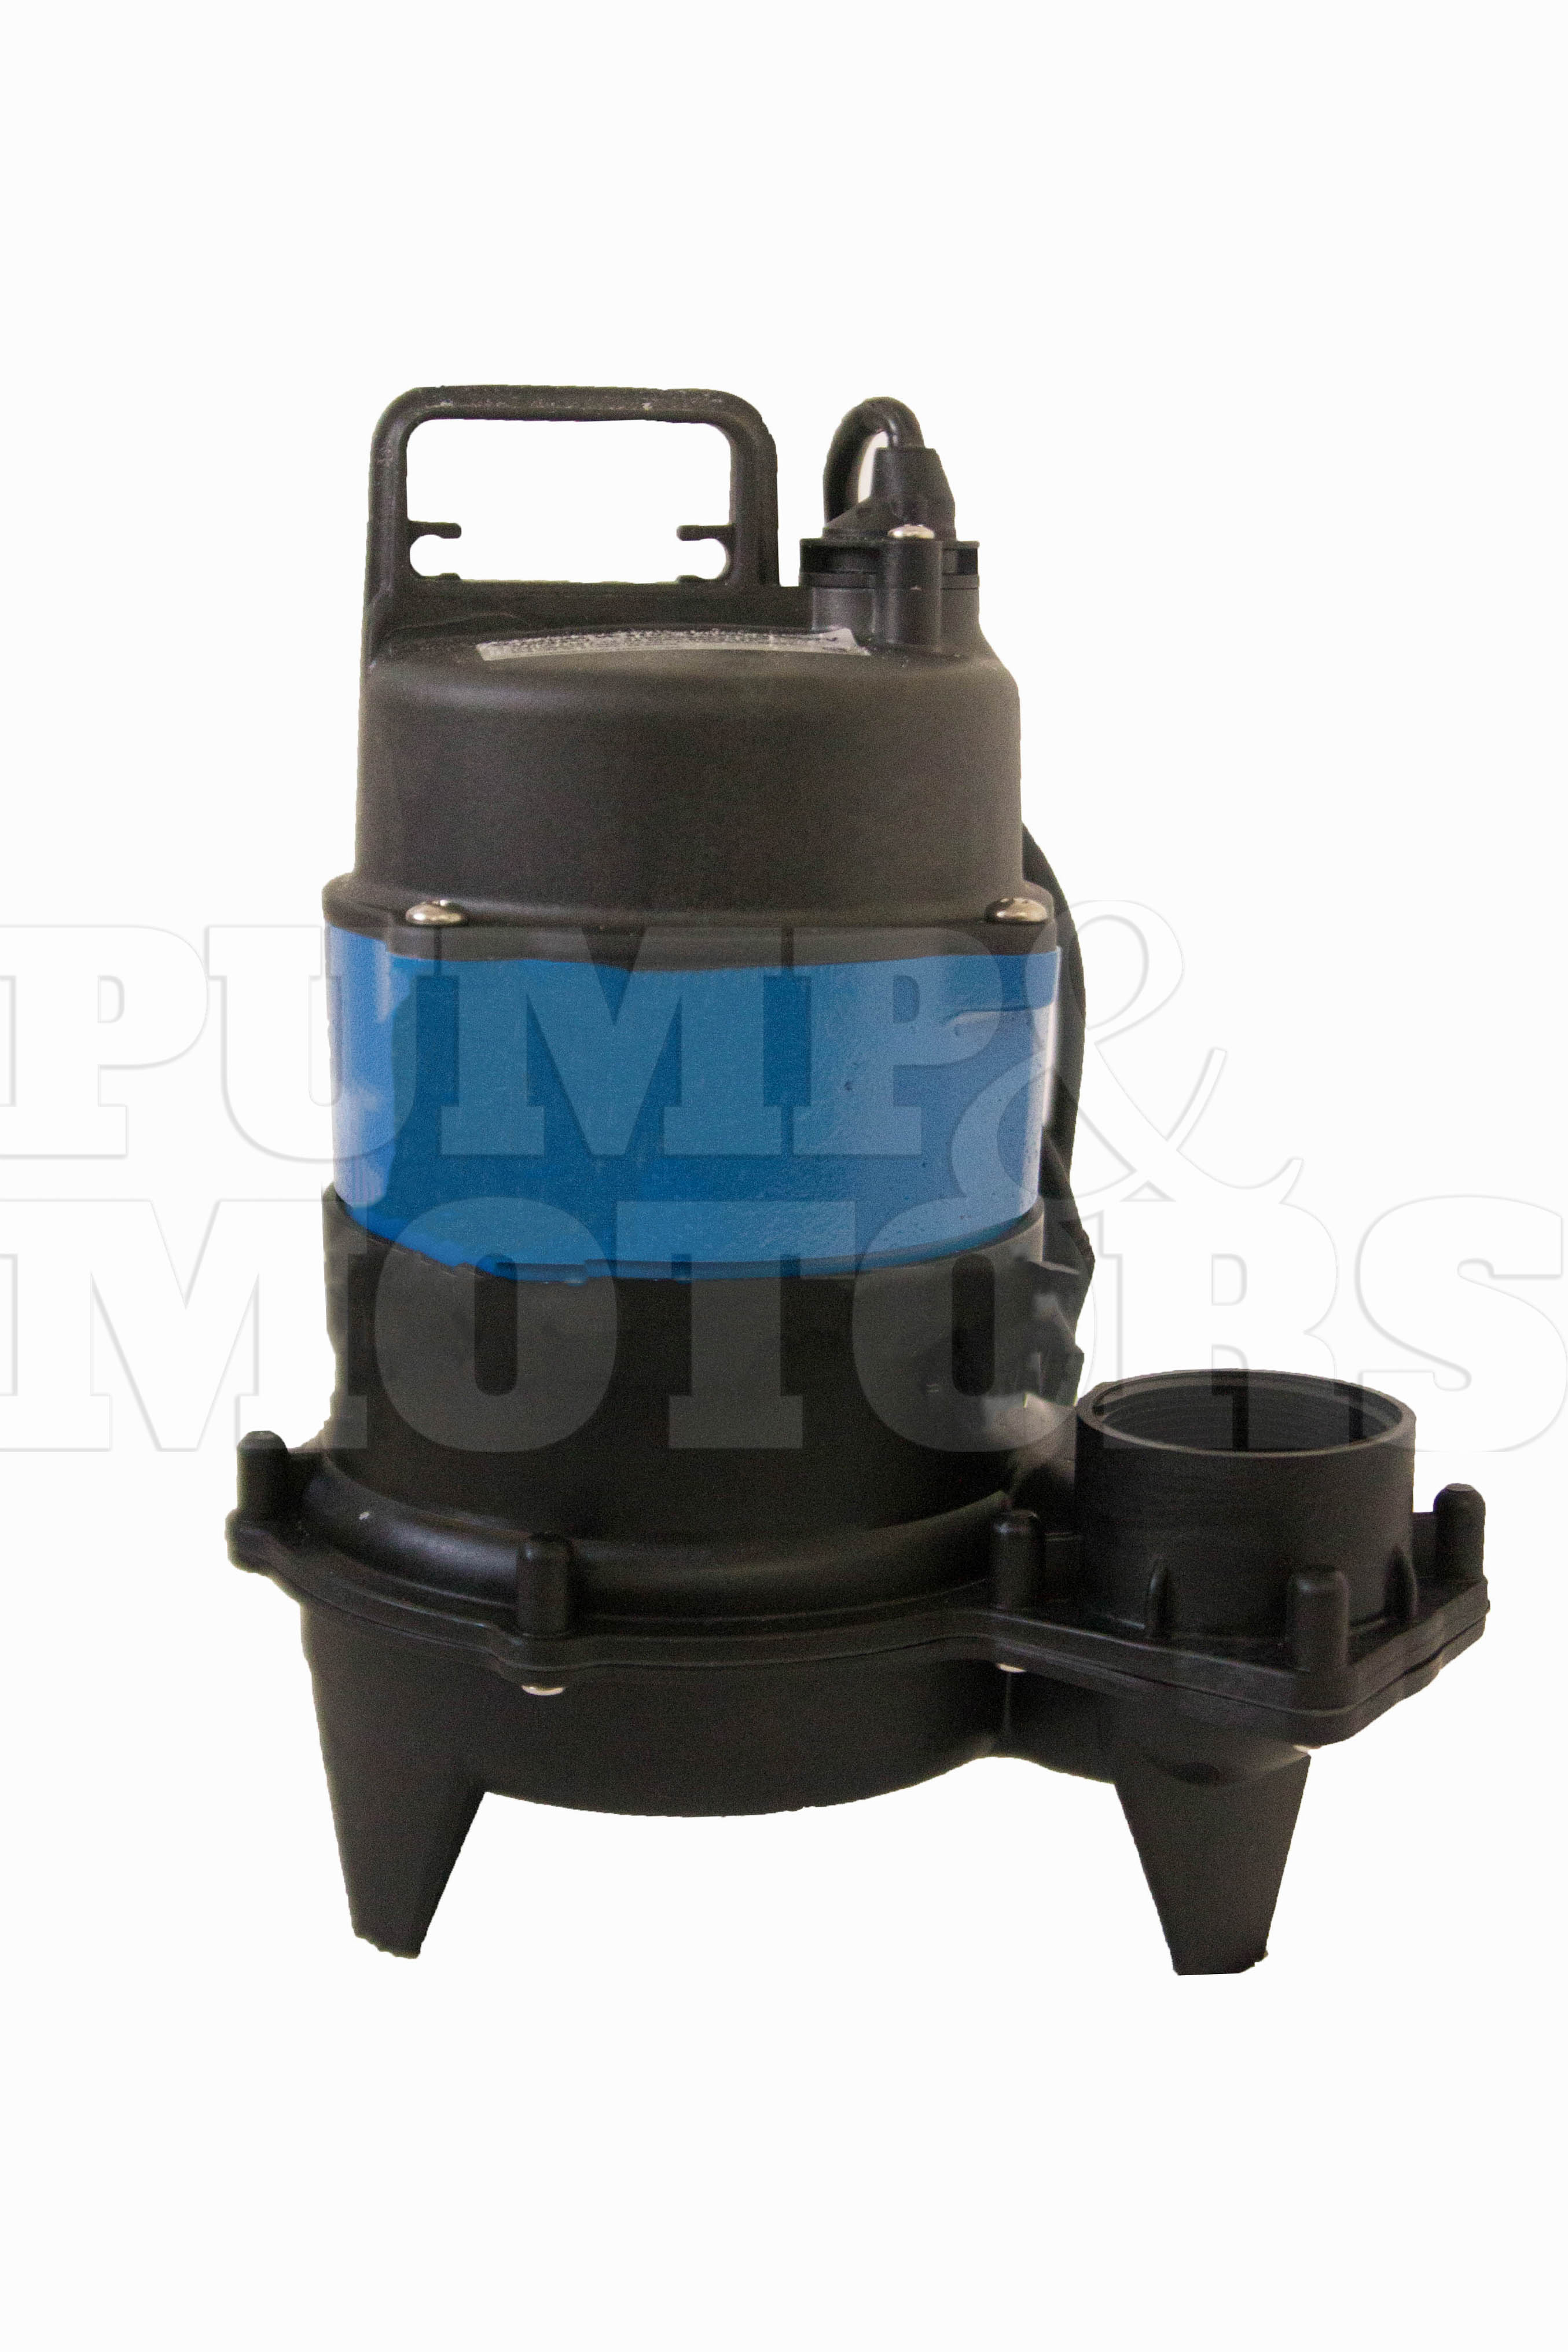 Goulds WW0512 1/2HP Submersible Sewage Pump 230V Plug/No Switch